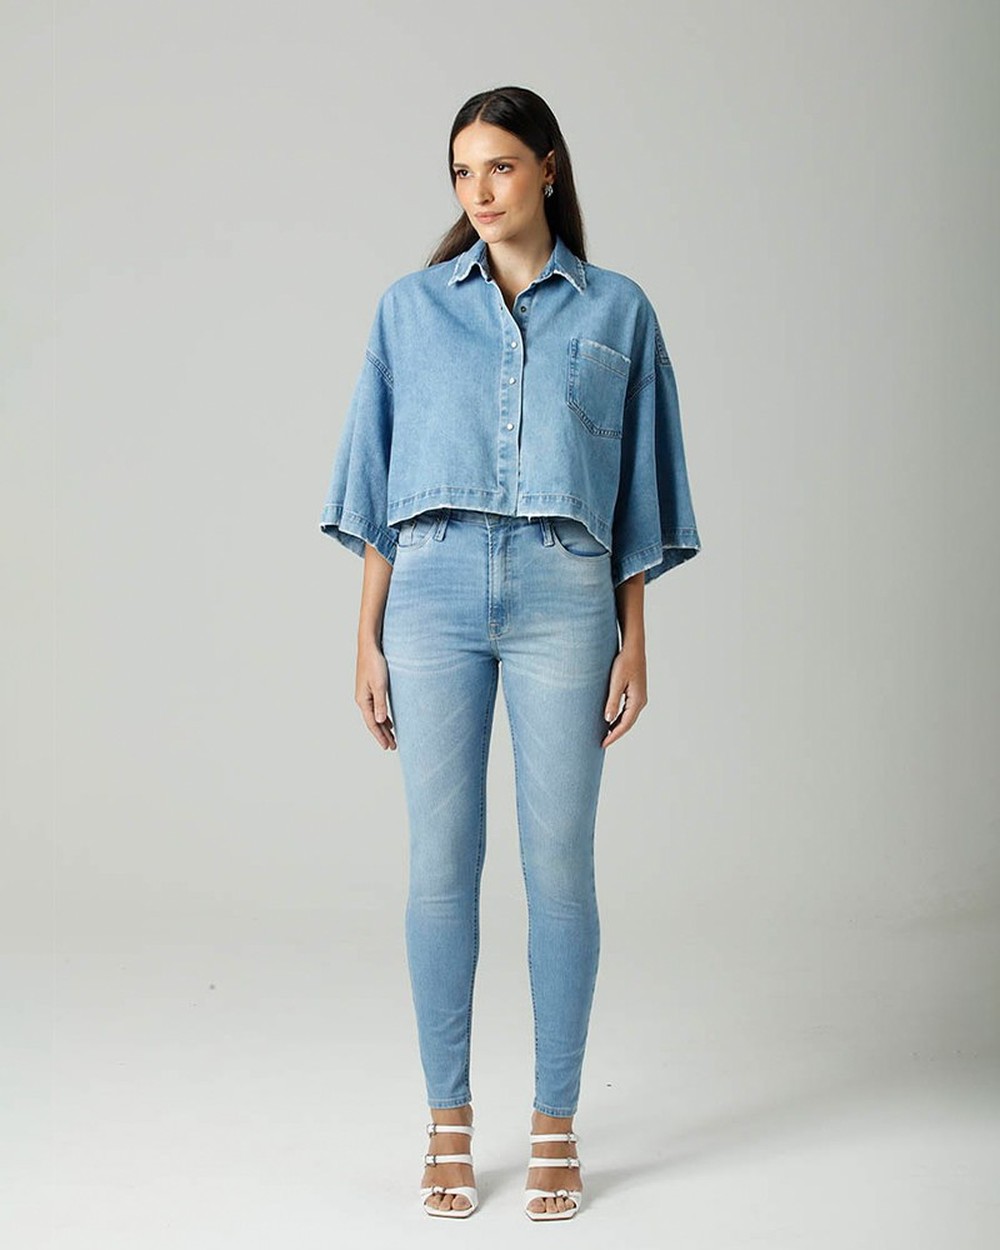 Camisa Cropped Box Jeans